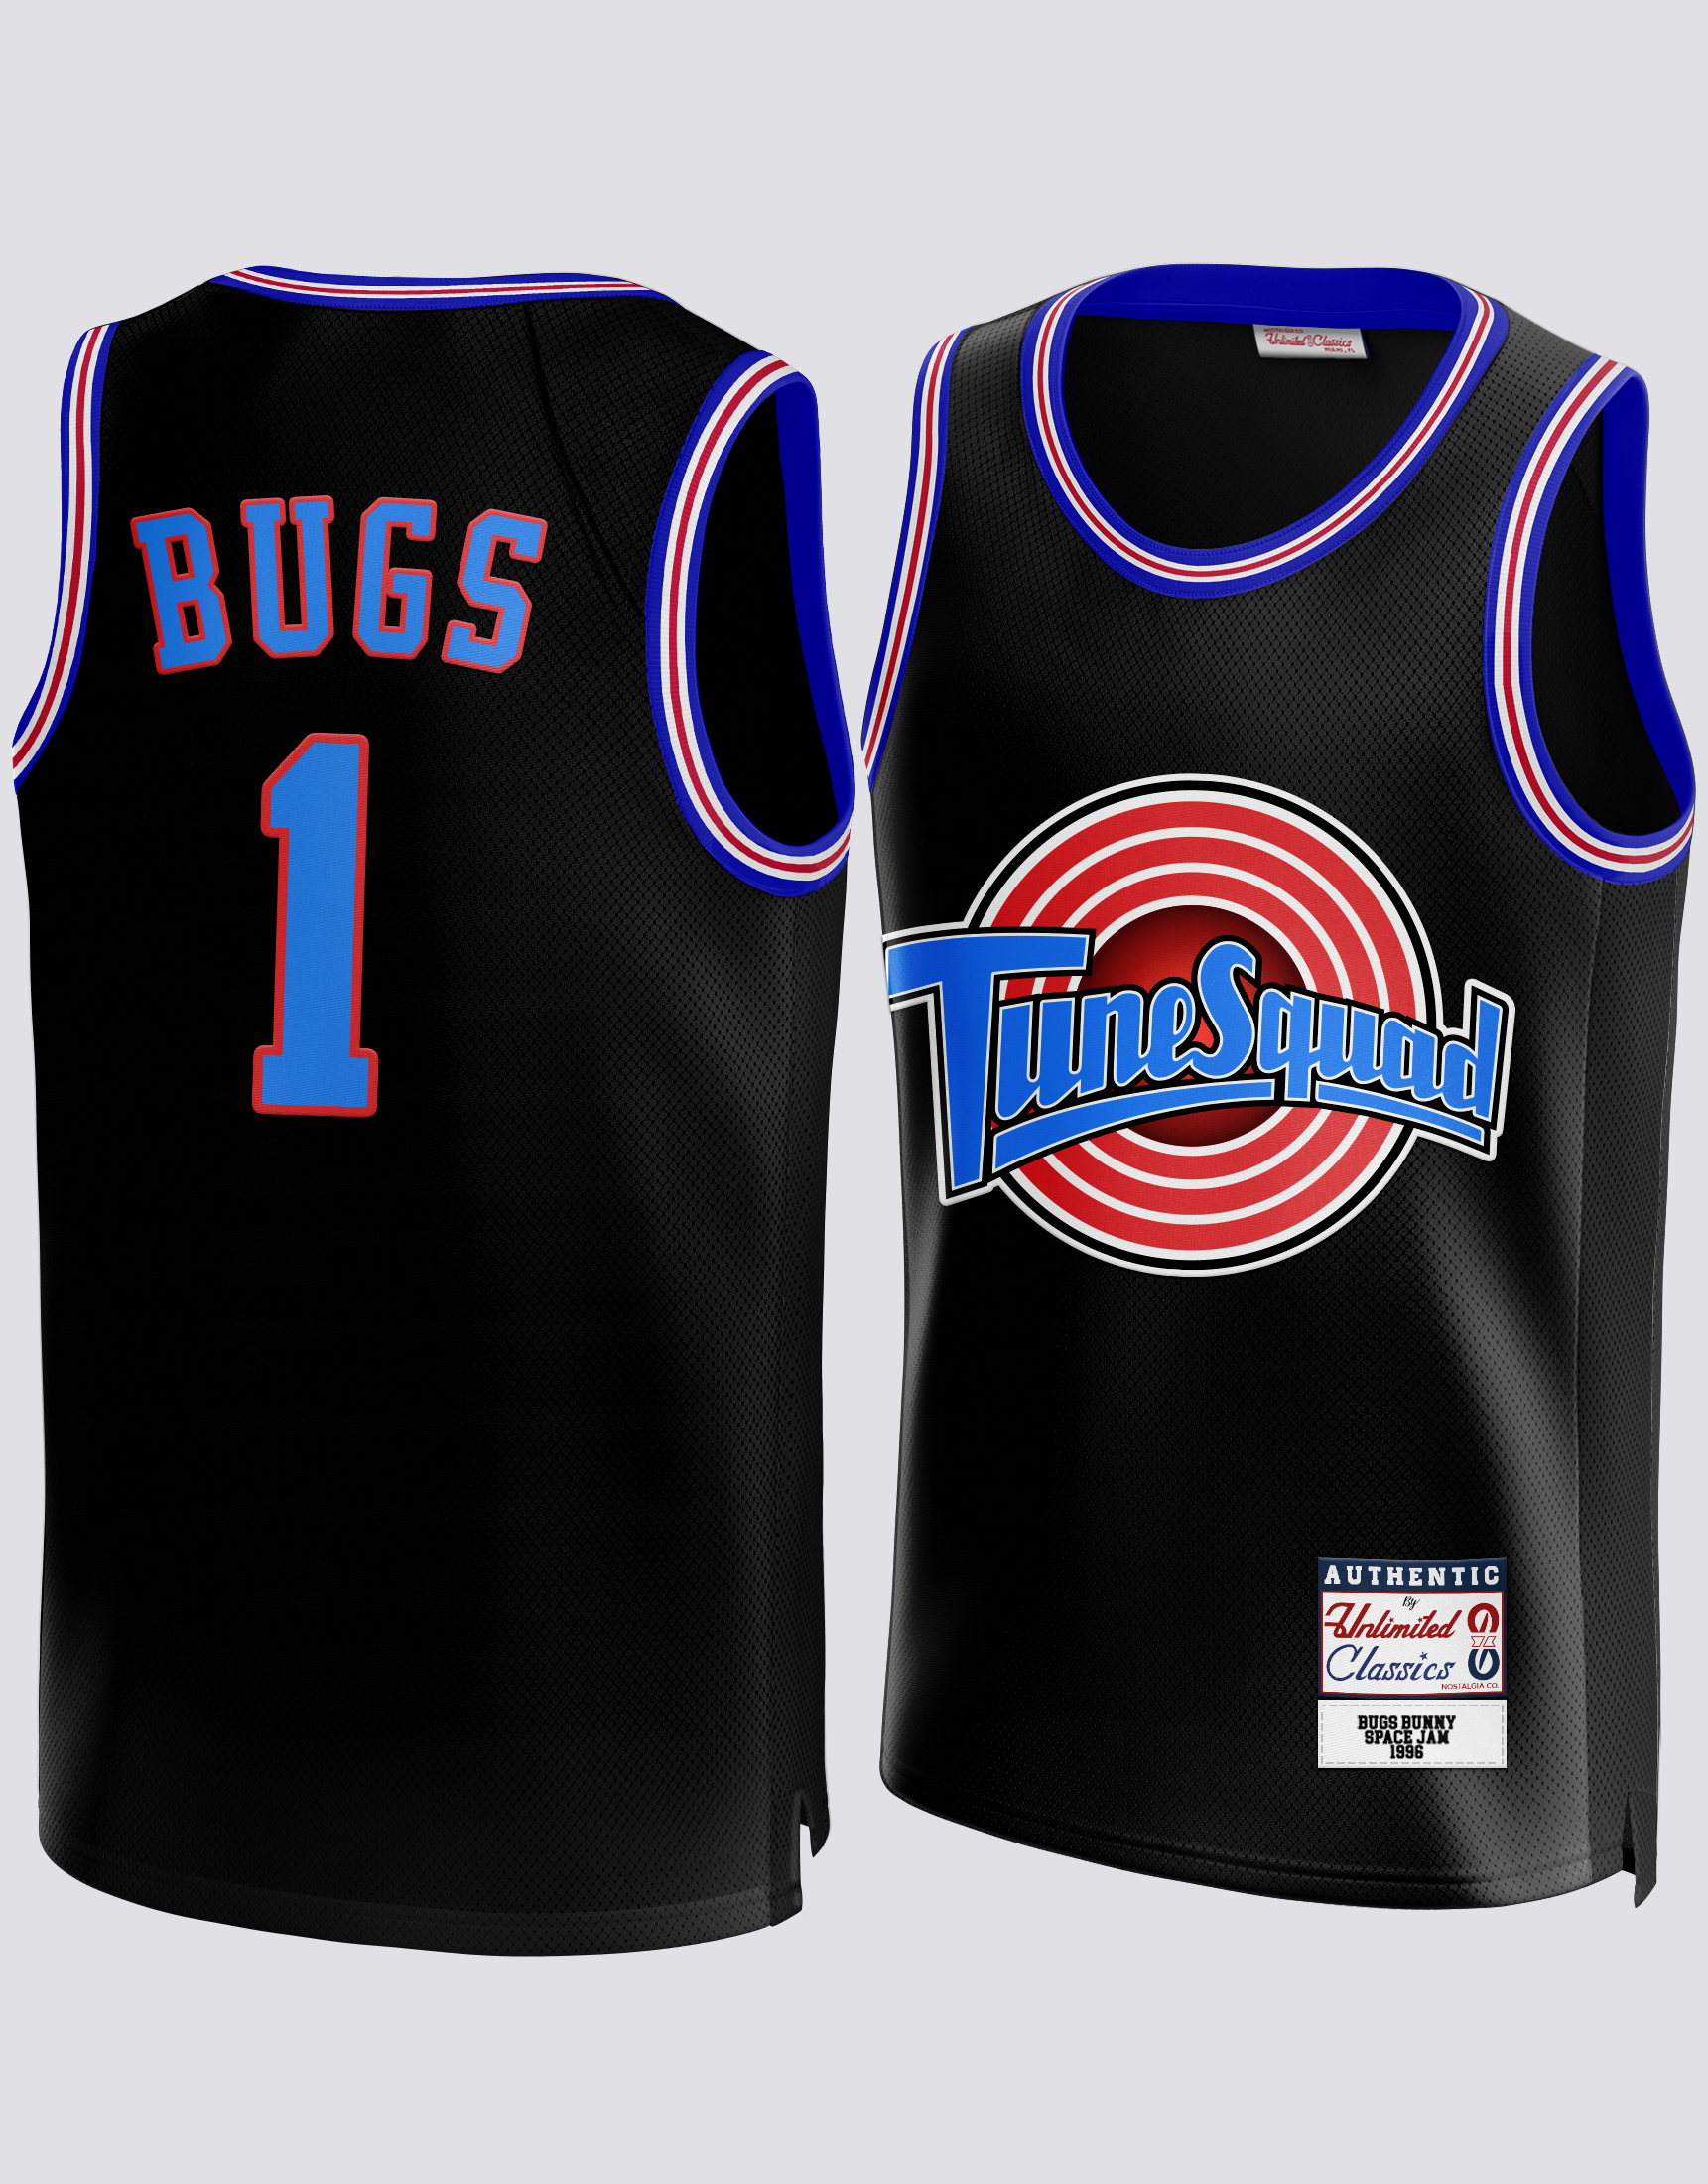 Space Jam Tune Squad Basketball Jersey (Bugs  